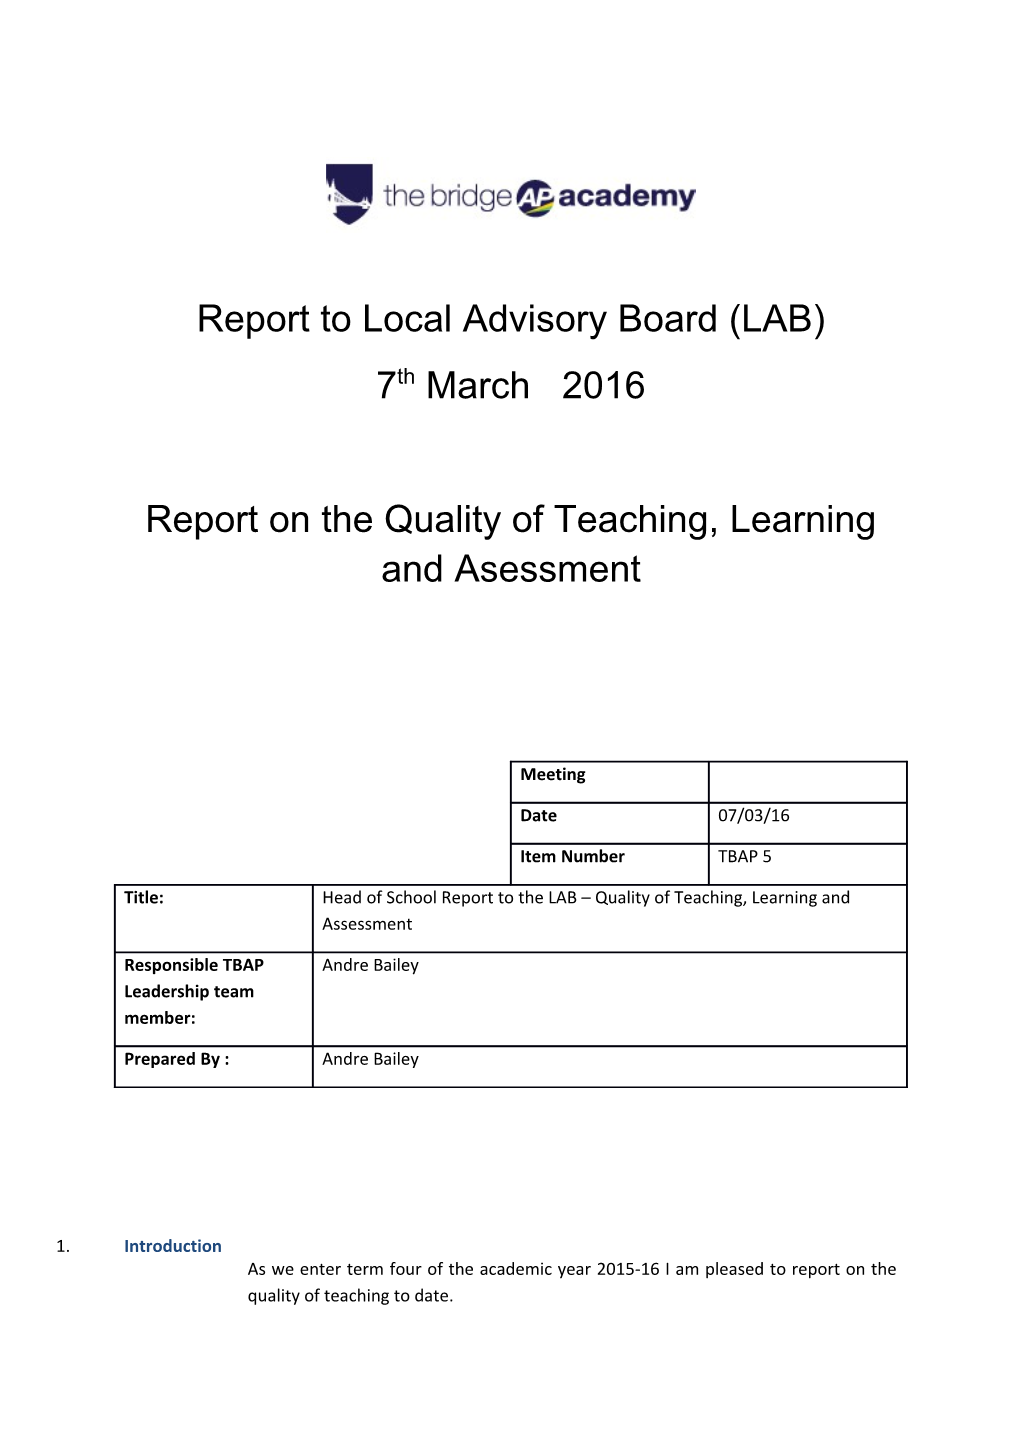 Report on the Quality of Teaching, Learning and Asessment